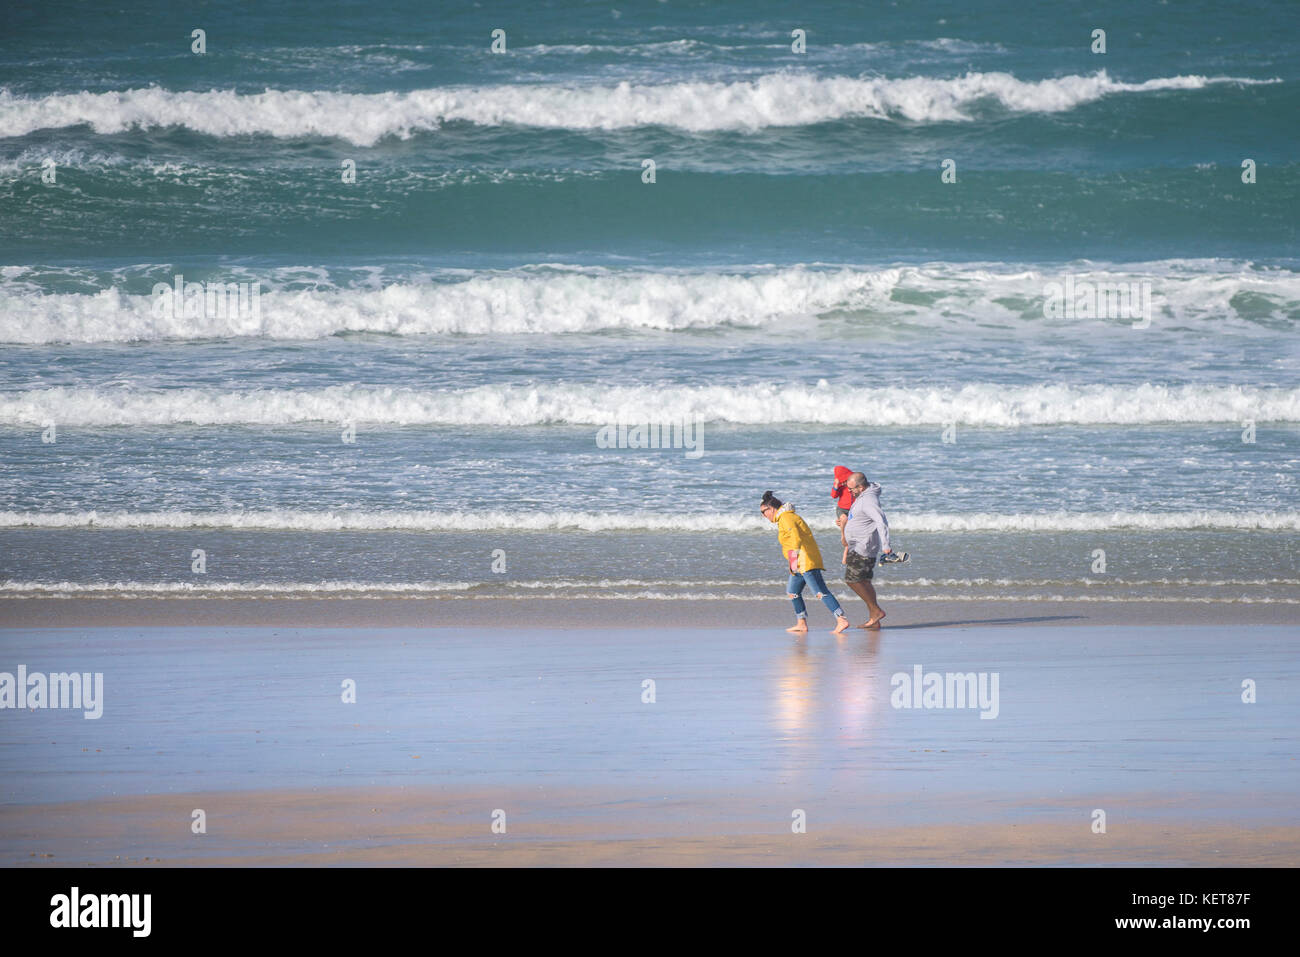 UK weather windy conditons - a family walkiing into strong wind on Fistral Beach in Newquay, Cornwall. Stock Photo